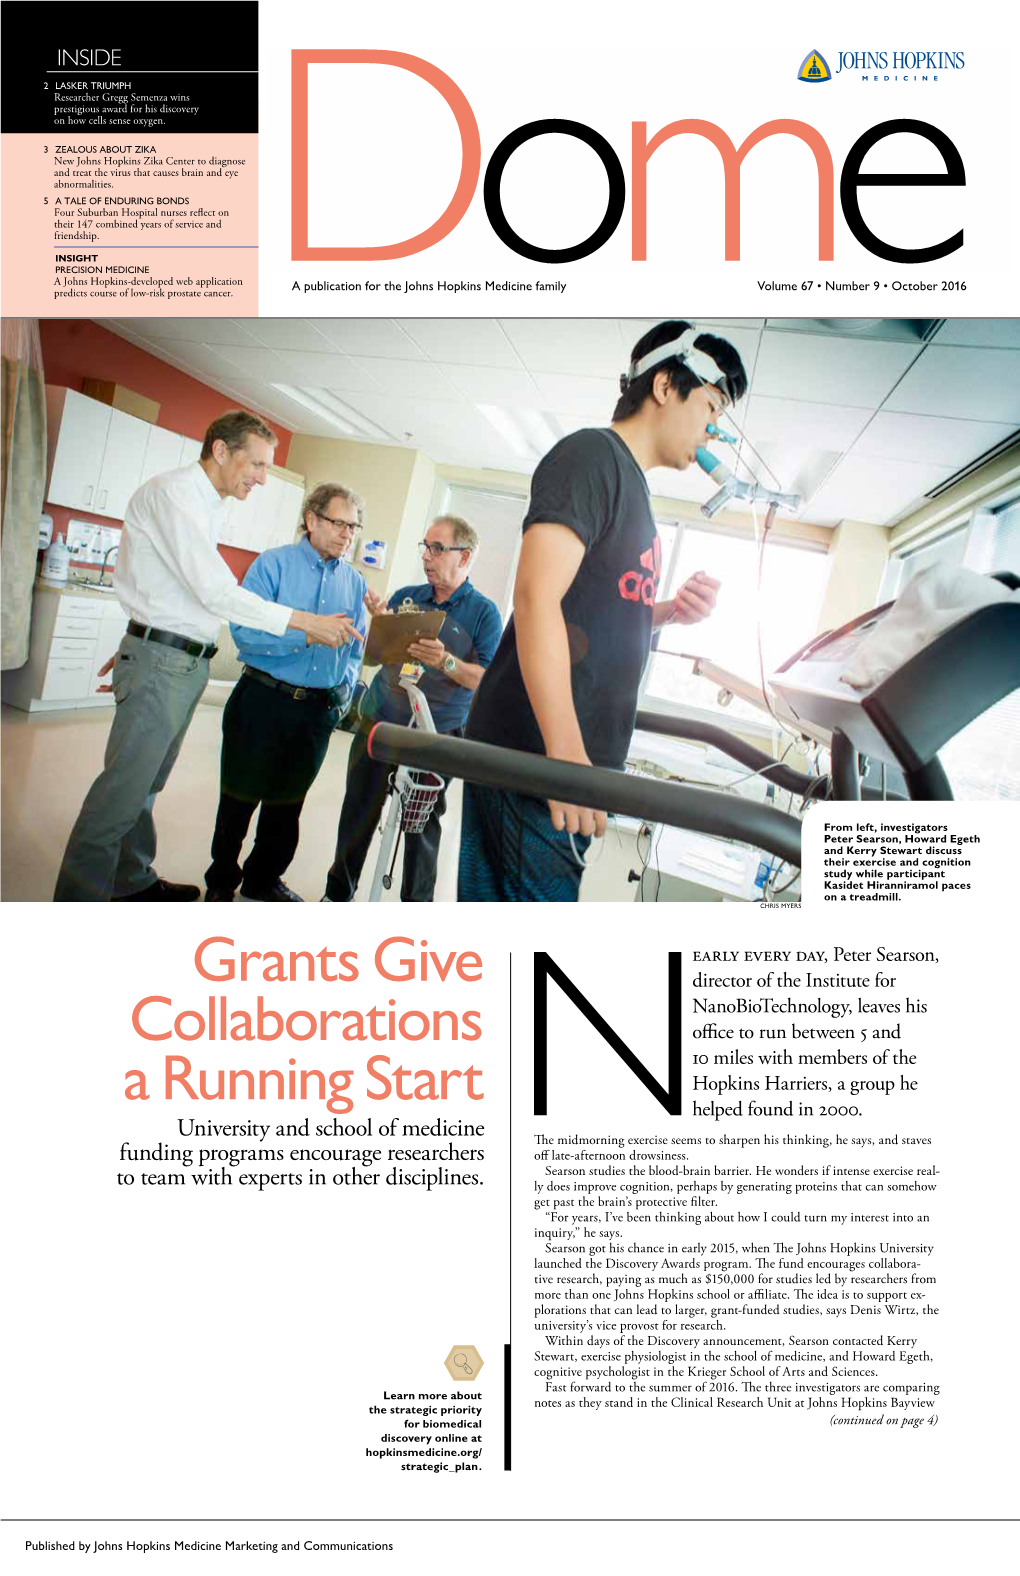 Grants Give Collaborations a Running Start (Continued from Page 1)